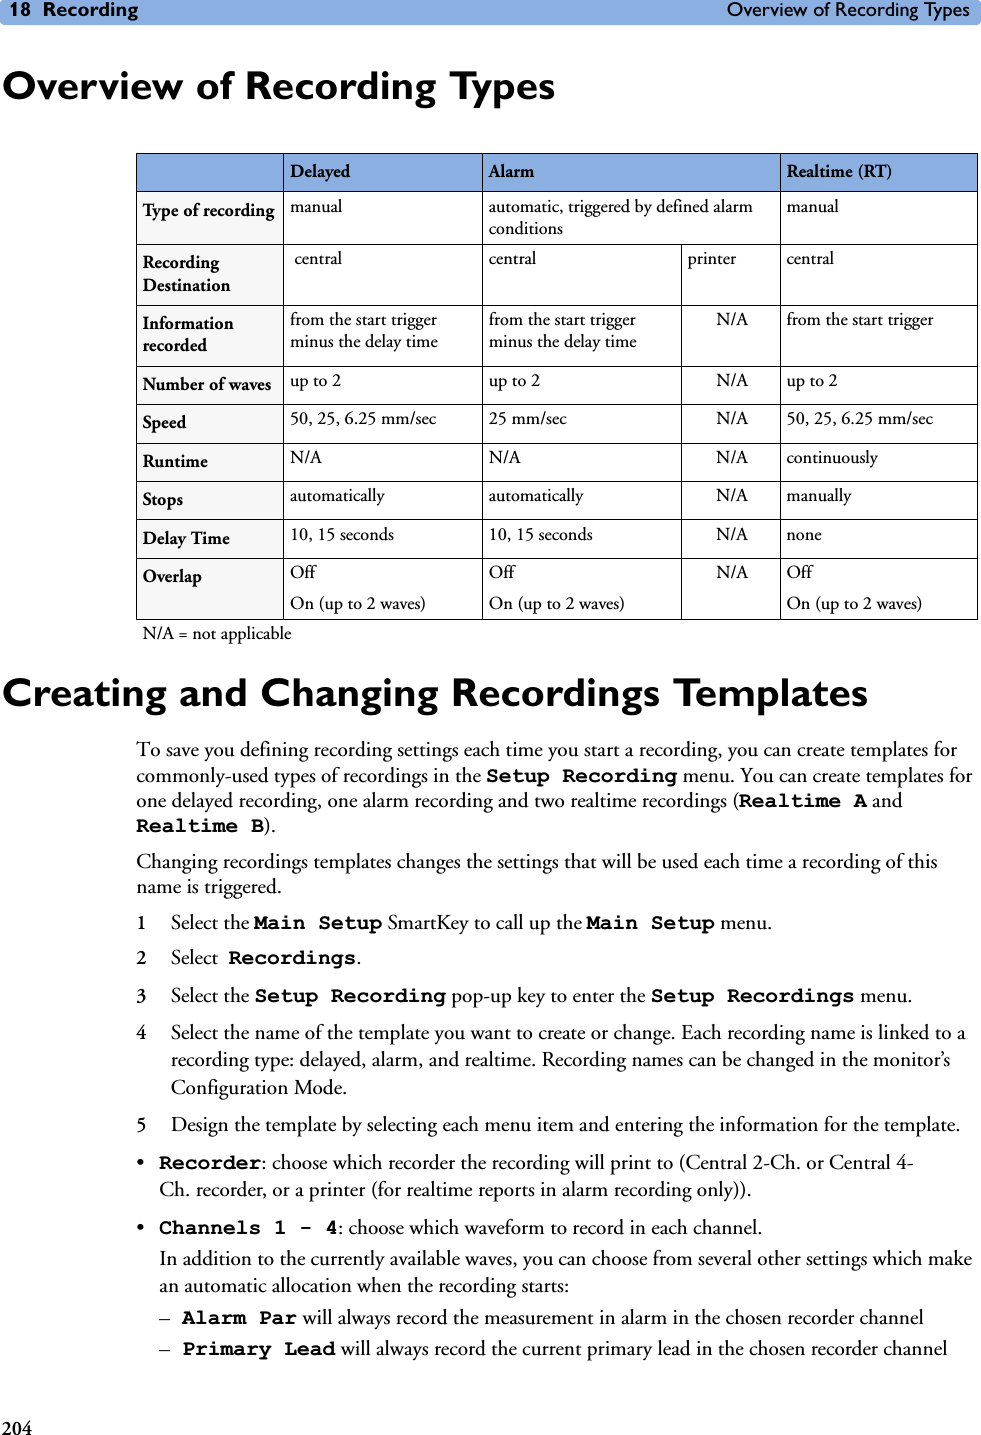 18 Recording Overview of Recording Types204Overview of Recording TypesCreating and Changing Recordings TemplatesTo save you defining recording settings each time you start a recording, you can create templates for commonly-used types of recordings in the Setup Recording menu. You can create templates for one delayed recording, one alarm recording and two realtime recordings (Realtime A and Realtime B).Changing recordings templates changes the settings that will be used each time a recording of this name is triggered.1Select the Main Setup SmartKey to call up the Main Setup menu.2Select  Recordings.3Select the Setup Recording pop-up key to enter the Setup Recordings menu.4Select the name of the template you want to create or change. Each recording name is linked to a recording type: delayed, alarm, and realtime. Recording names can be changed in the monitor’s Configuration Mode.5Design the template by selecting each menu item and entering the information for the template. •Recorder: choose which recorder the recording will print to (Central 2-Ch. or Central 4-Ch. recorder, or a printer (for realtime reports in alarm recording only)). •Channels 1 - 4: choose which waveform to record in each channel.In addition to the currently available waves, you can choose from several other settings which make an automatic allocation when the recording starts:–Alarm Par will always record the measurement in alarm in the chosen recorder channel–Primary Lead will always record the current primary lead in the chosen recorder channelDelayed Alarm Realtime (RT)Type of recording  manual automatic, triggered by defined alarm conditions manualRecording Destination central  central  printer centralInformation recordedfrom the start trigger minus the delay timefrom the start trigger minus the delay timeN/A from the start triggerNumber of waves up to 2 up to 2 N/A up to 2Speed 50, 25, 6.25 mm/sec 25 mm/sec N/A 50, 25, 6.25 mm/secRuntime N/A N/A N/A continuouslyStops automatically automatically N/A manuallyDelay Time 10, 15 seconds 10, 15 seconds N/A noneOverlap OffOn (up to 2 waves)OffOn (up to 2 waves)N/A OffOn (up to 2 waves)N/A = not applicable